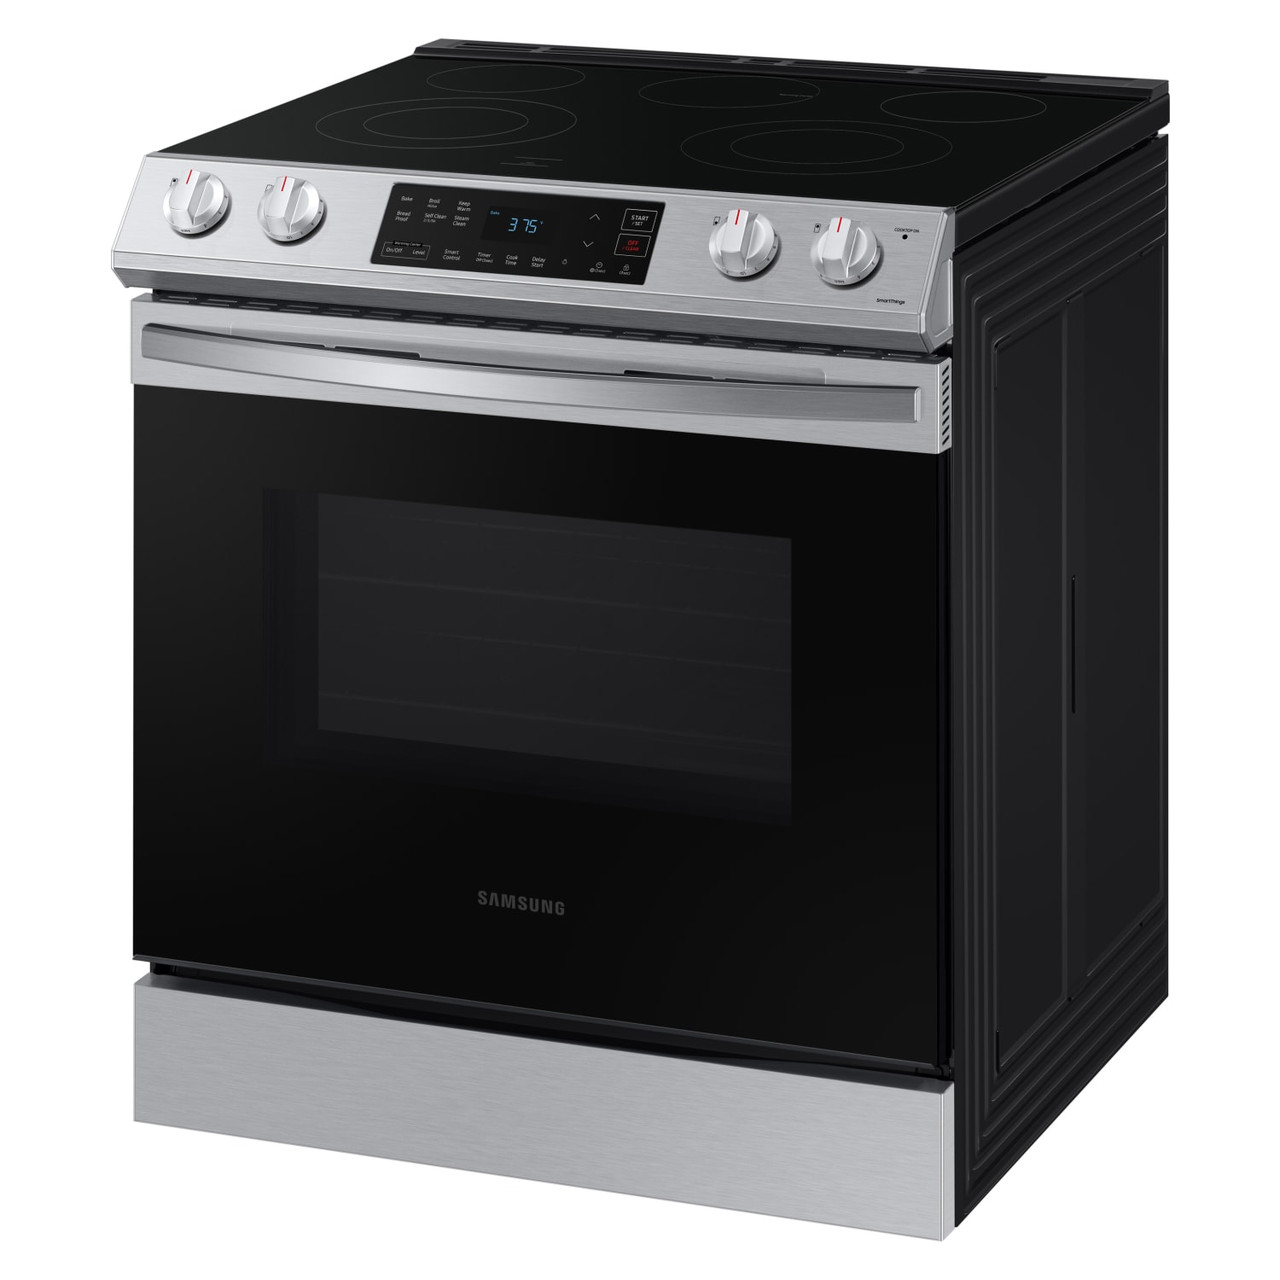 Samsung 6.3 cu ft. Front Control Slide-in Electric Range with Wi-Fi - NE63T8111SS